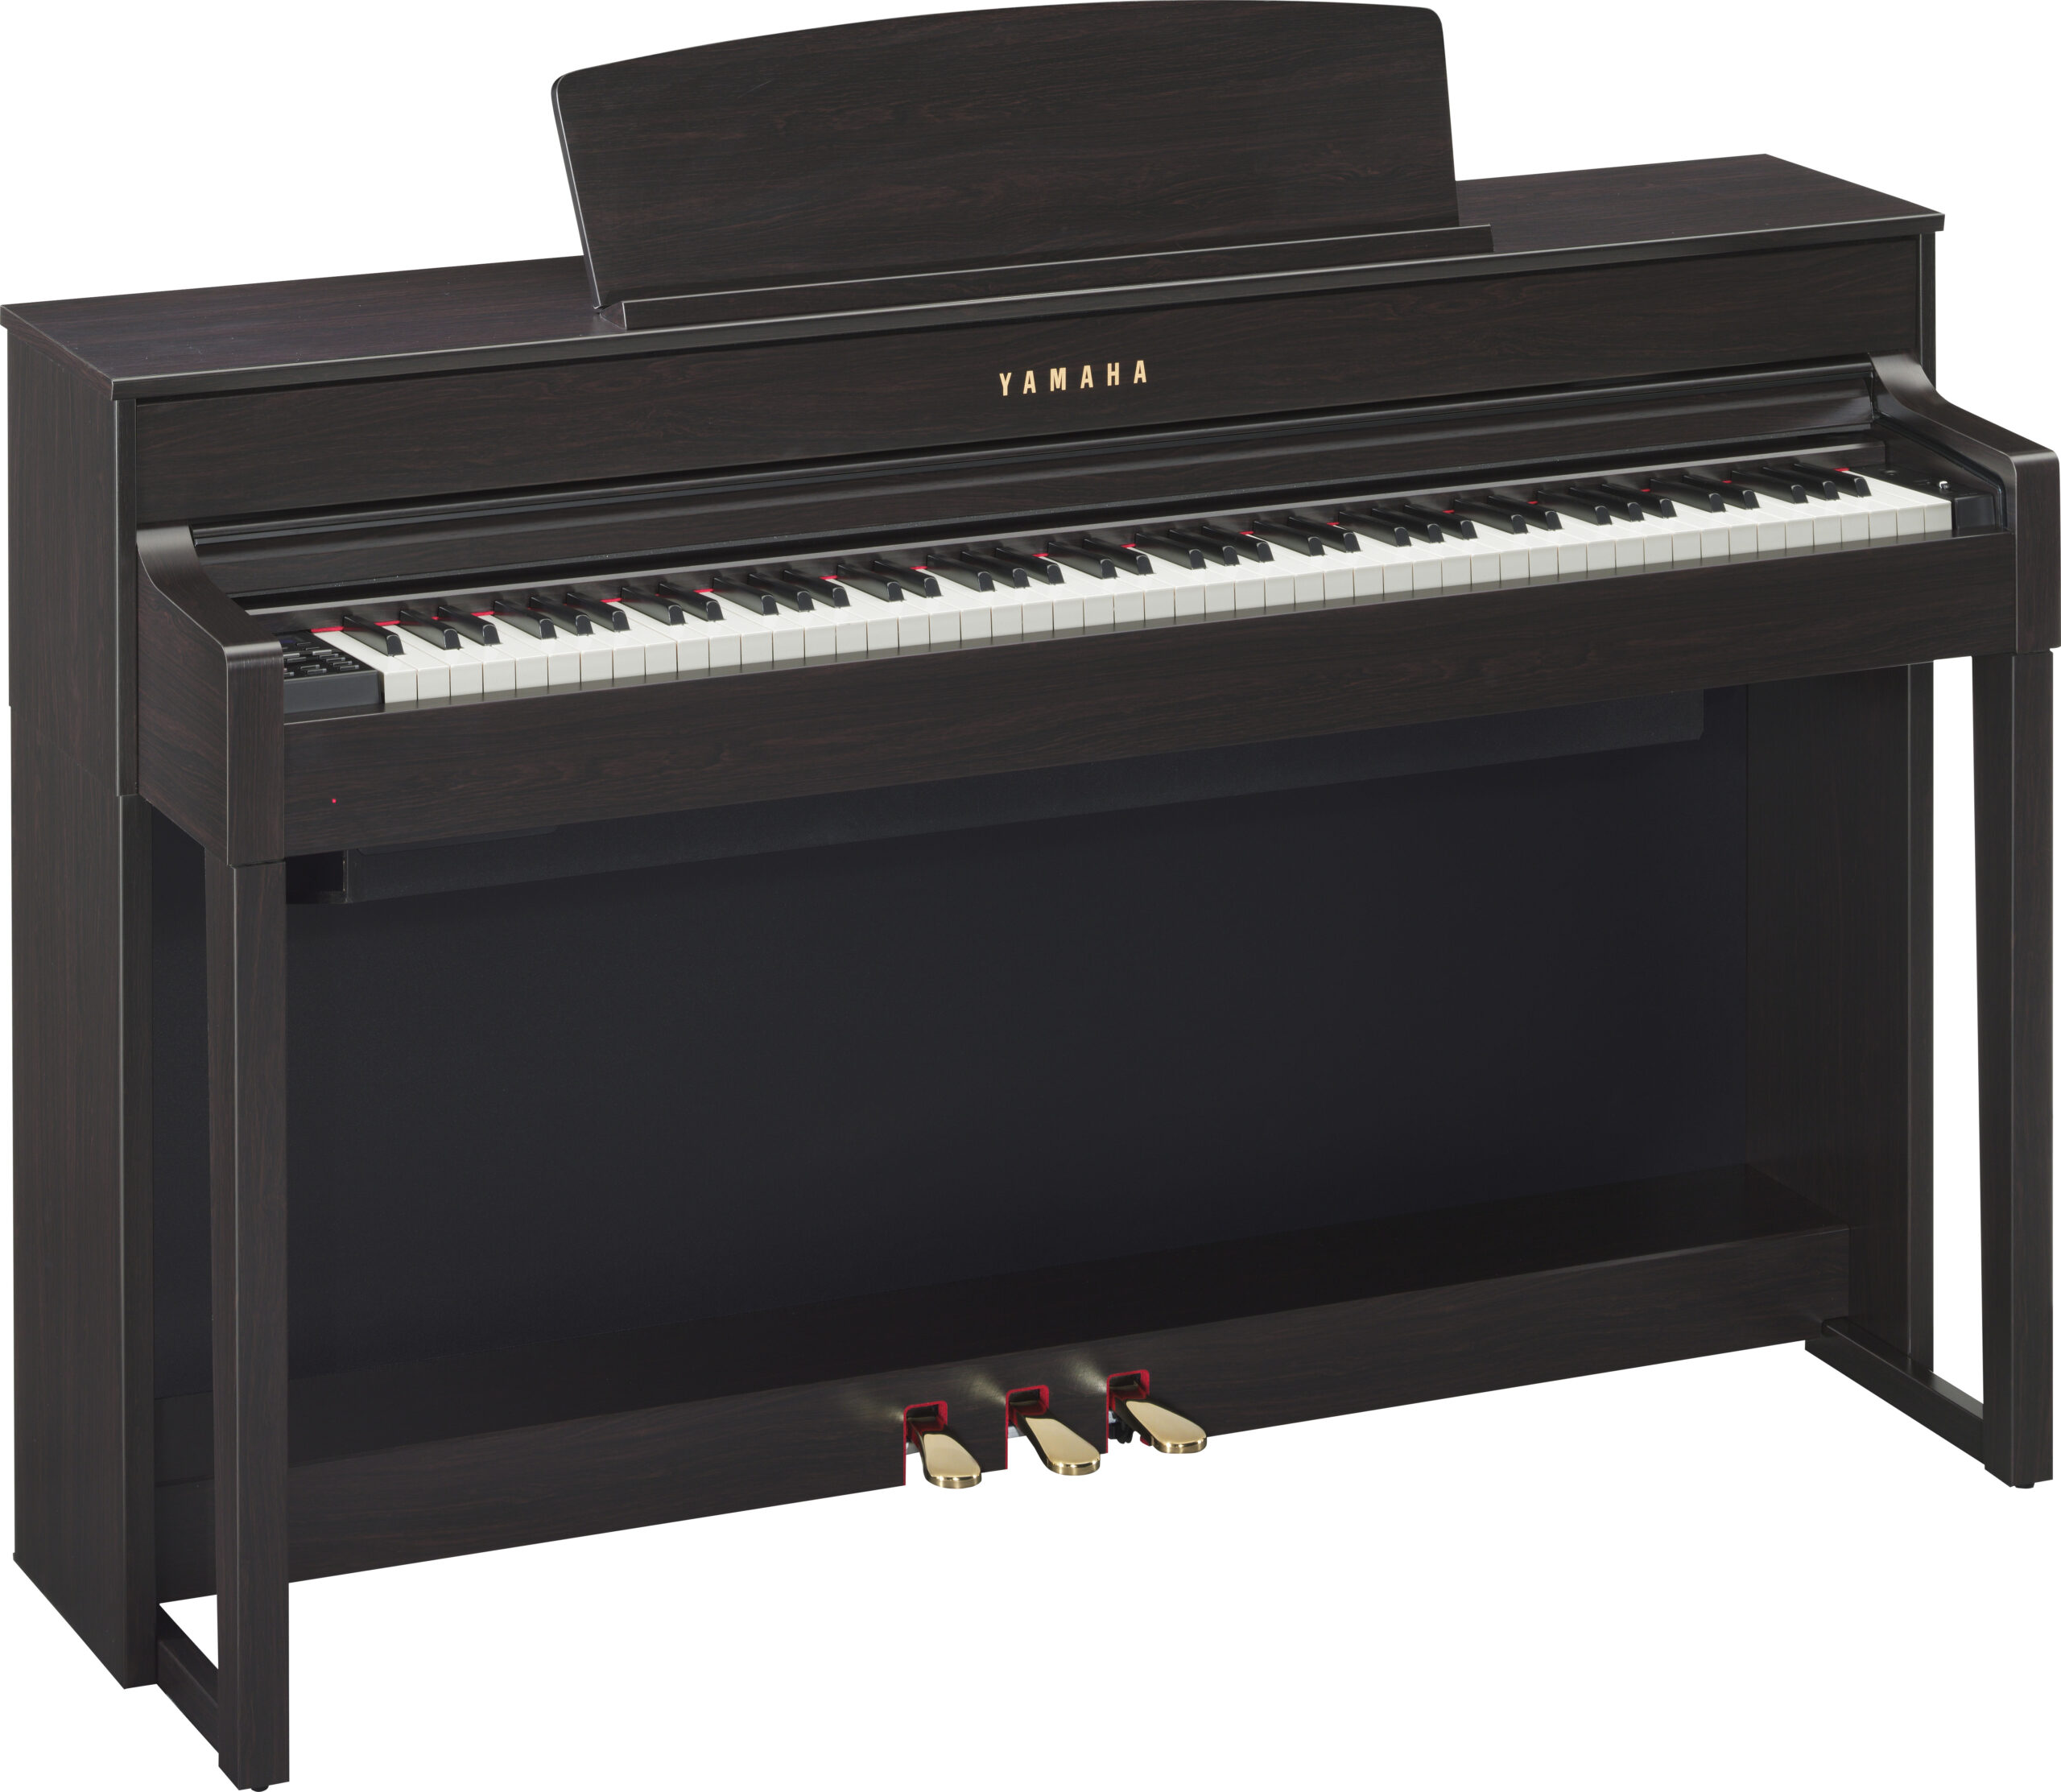 https://music-centre.ch/wp-content/uploads/products/204110/yamaha-clp-575-bois-fonce-scaled.jpg